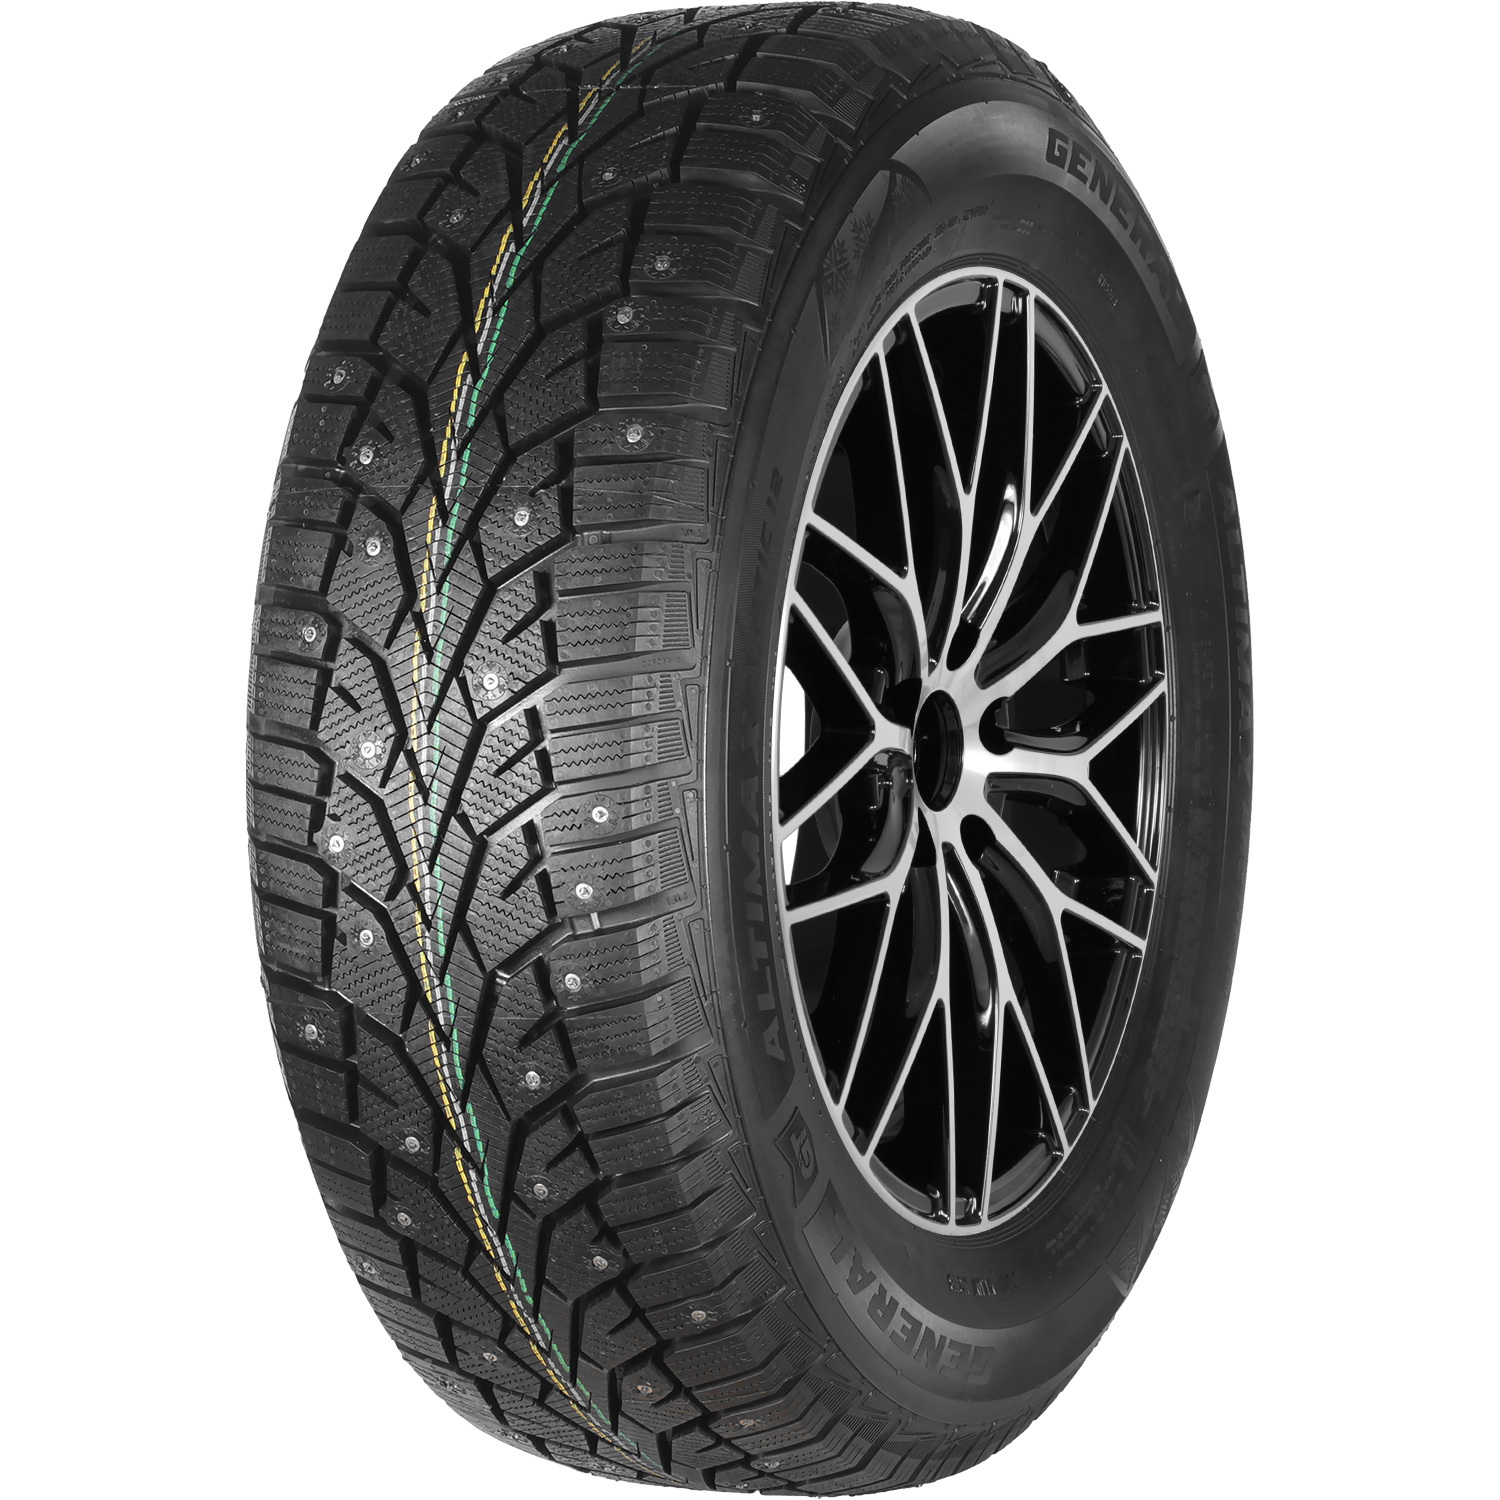 Автомобильная шина General Tire 175/70 R14 88T Шипованные camping spare tire cover car accessories custom spare tire covers your own personalized design tire protectors